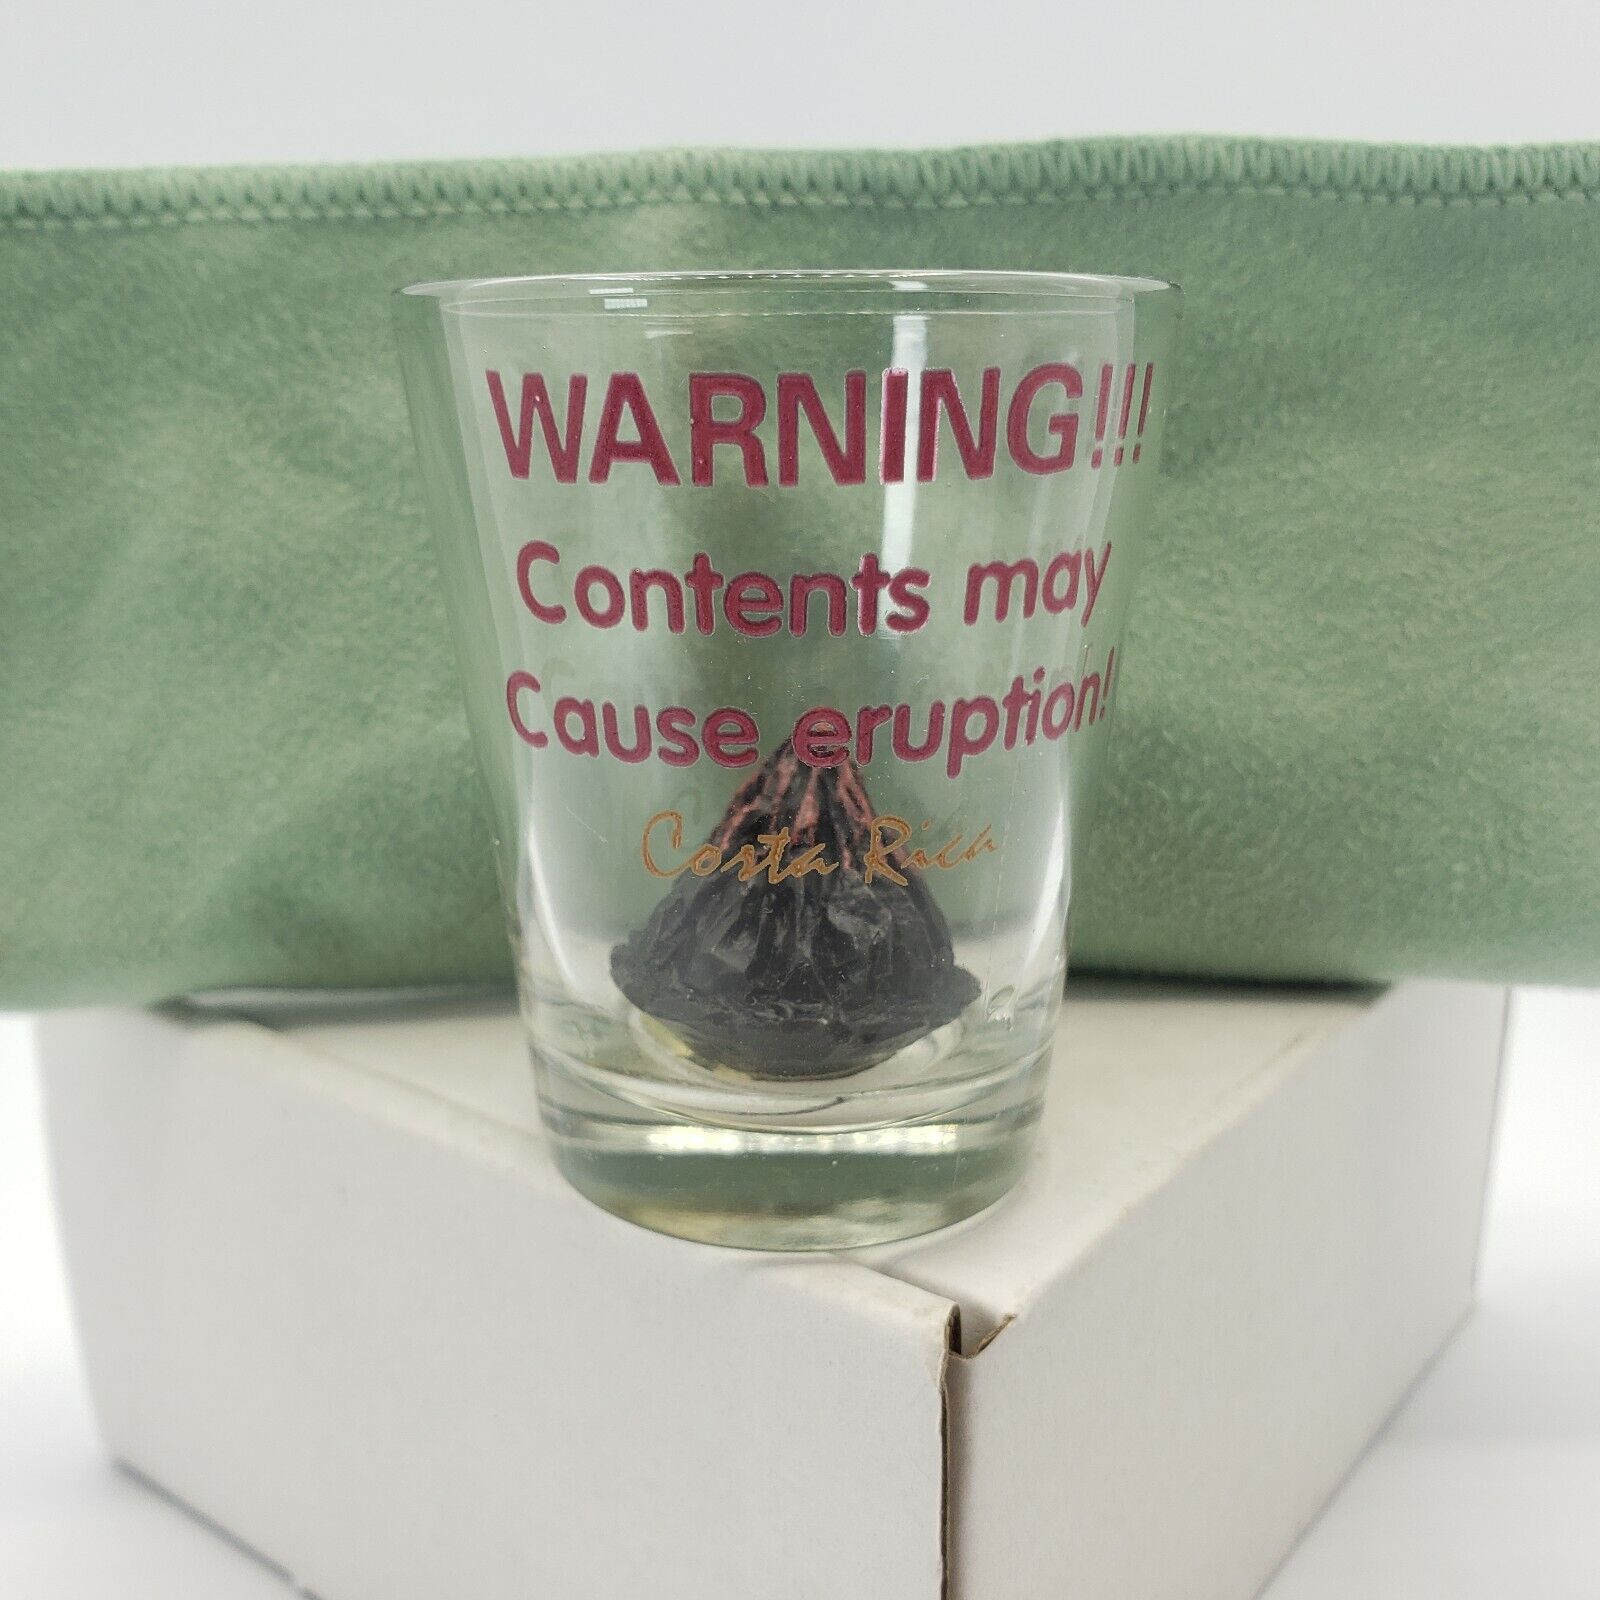 WARNING Contents May Cause Eruption Costa Rica 2.25 Inch Souvenir Shot Glass